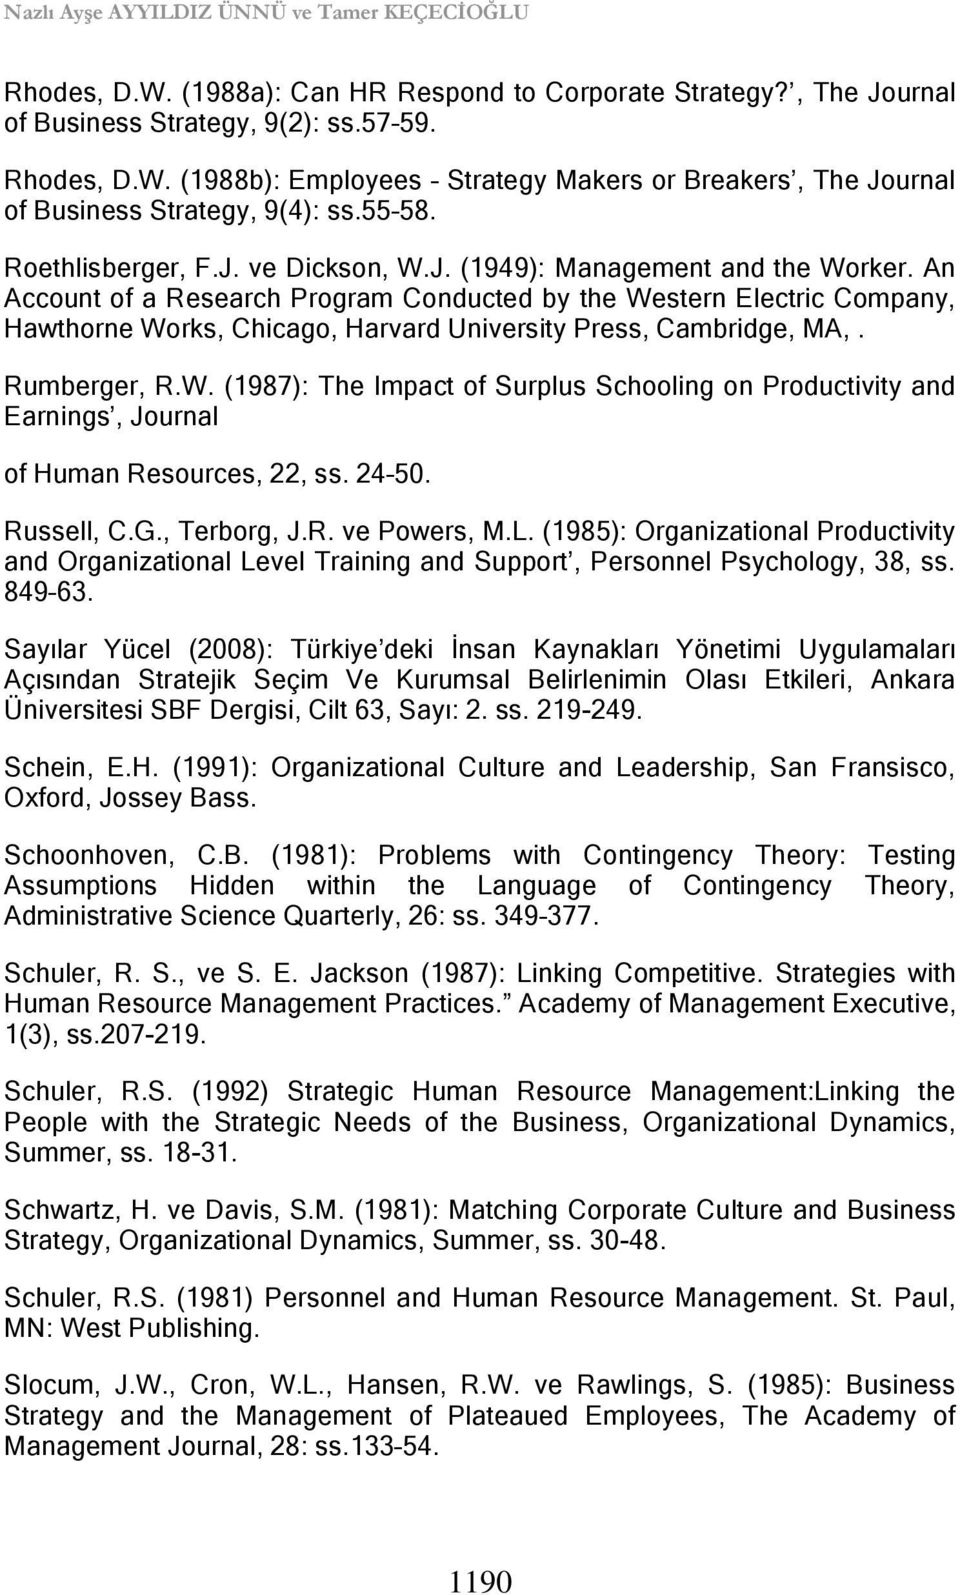 An Account of a Research Program Conducted by the Western Electric Company, Hawthorne Works, Chicago, Harvard University Press, Cambridge, MA,. Rumberger, R.W. (1987): The Impact of Surplus Schooling on Productivity and Earnings, Journal of Human Resources, 22, ss.